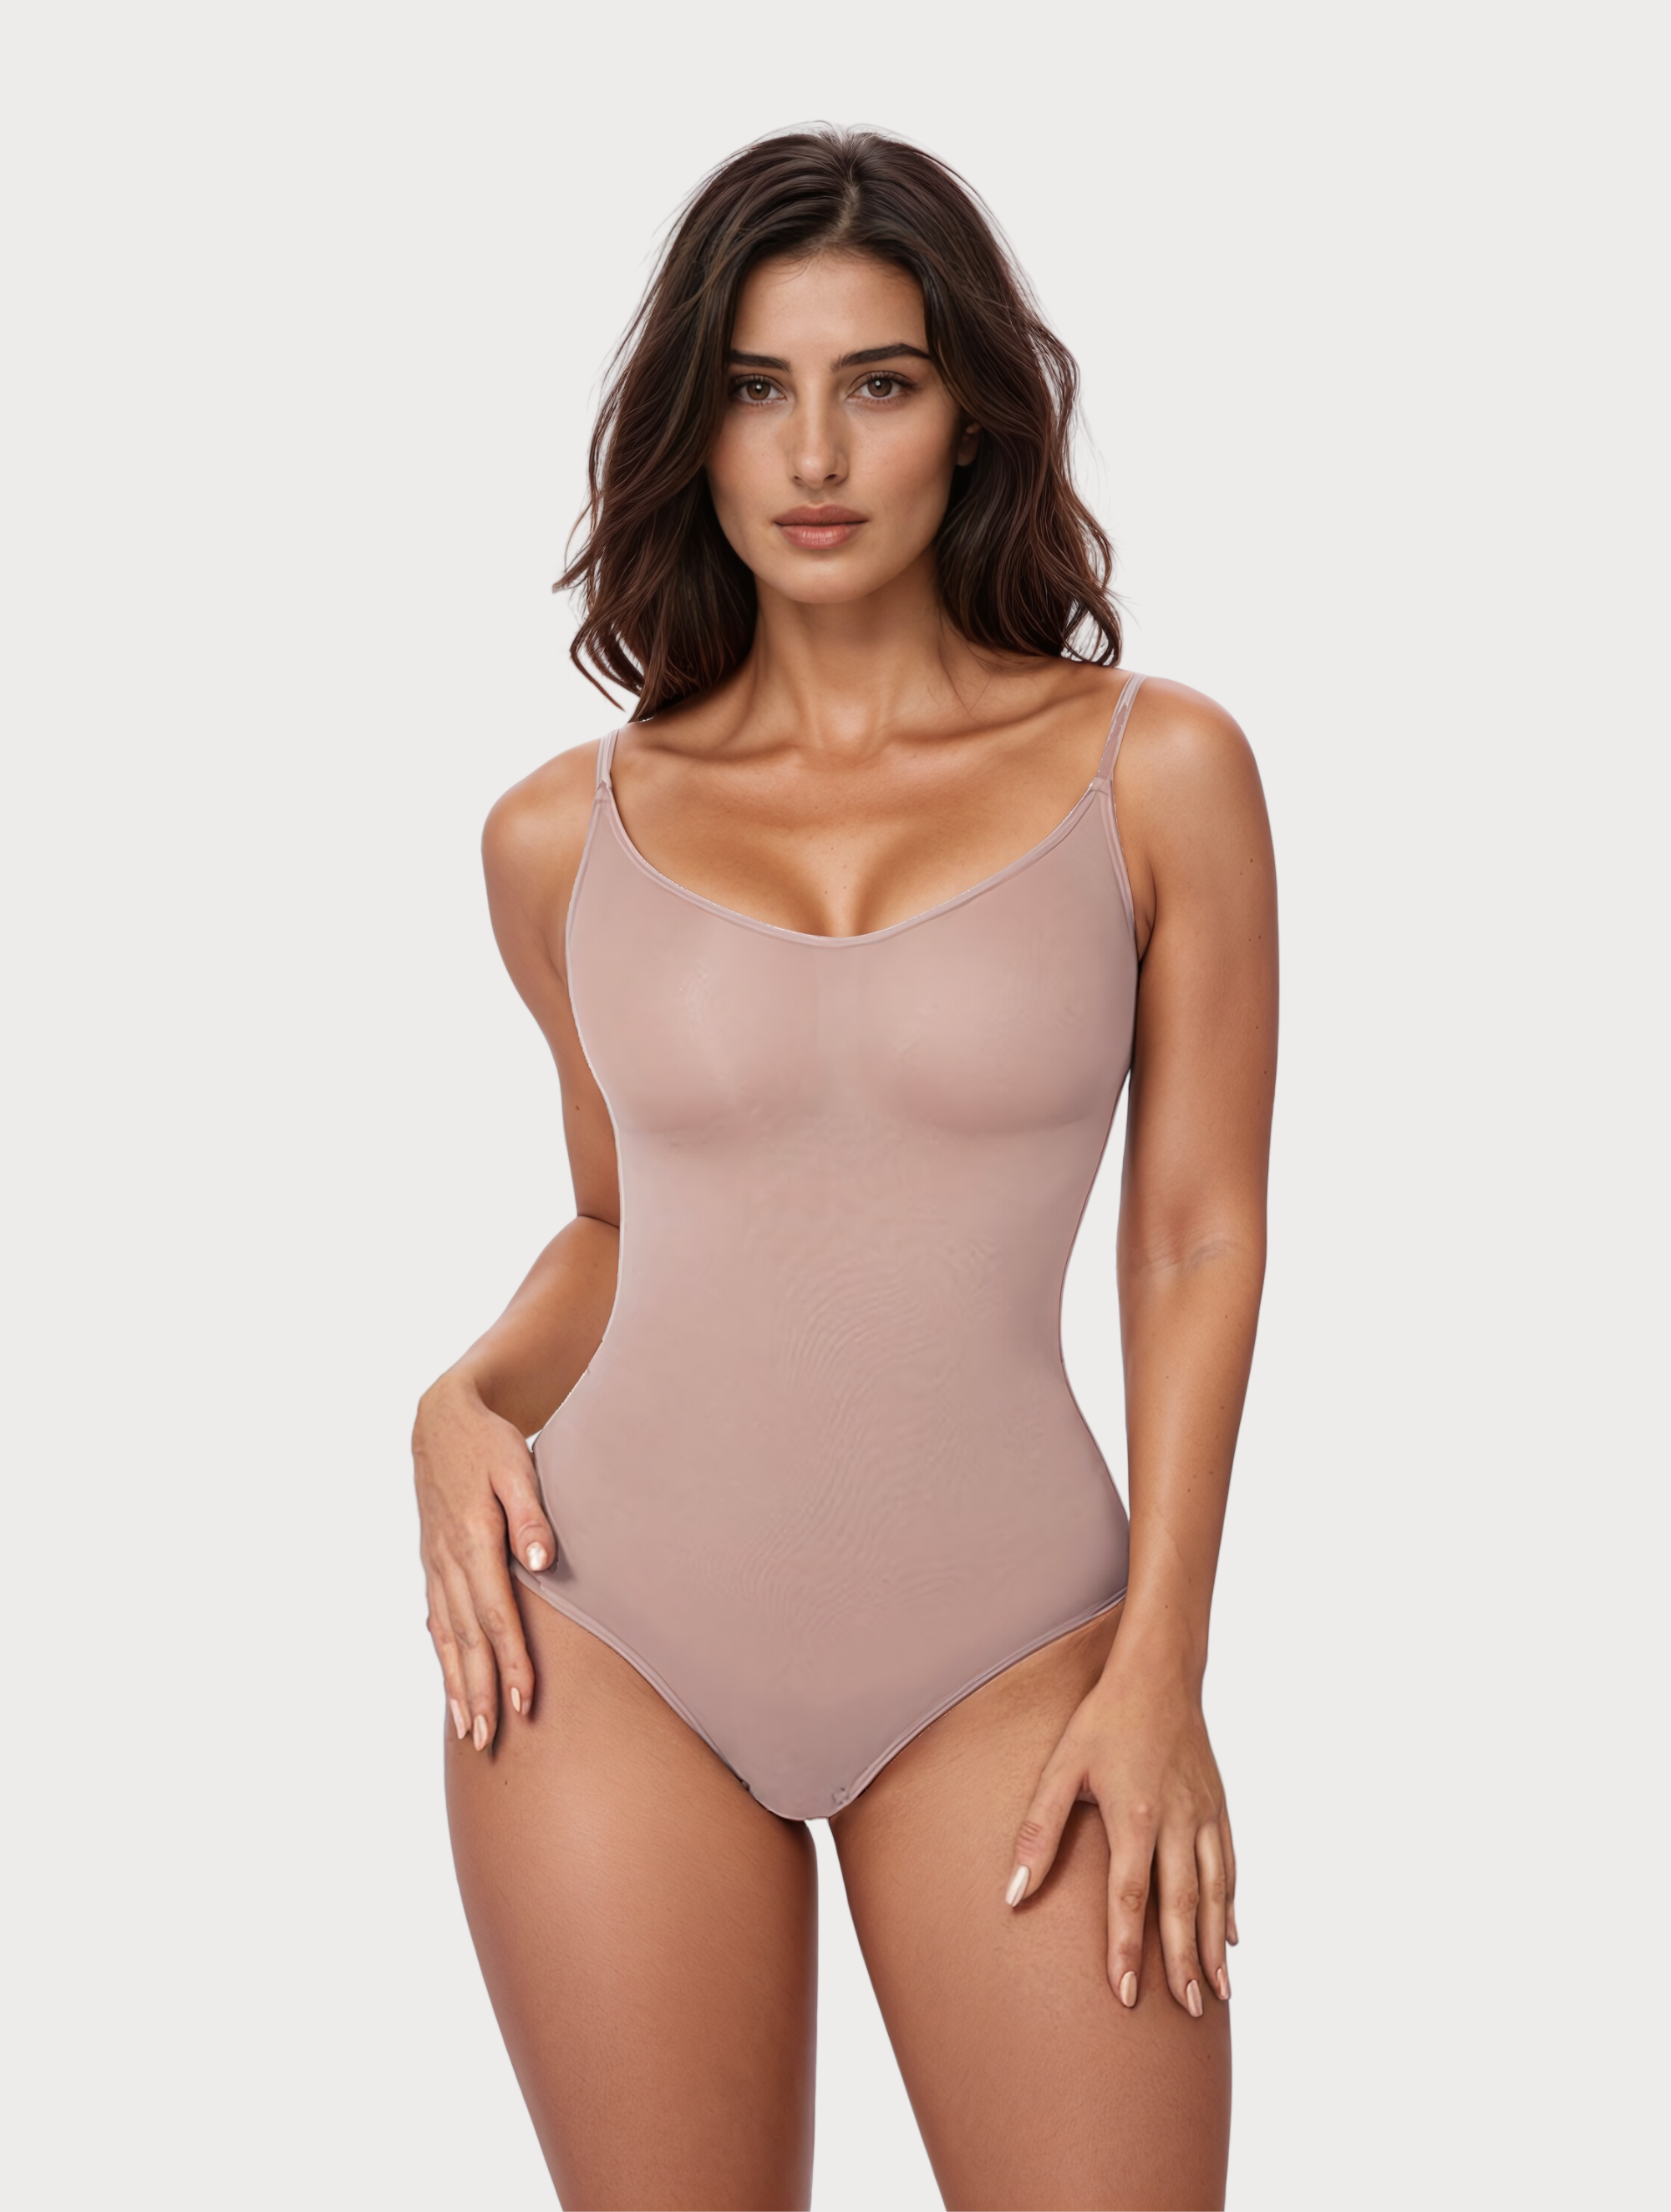 SHAPE FIX - Experience unparalleled comfort with our versatile all-day  shapewear, perfect for any occasion and wearable throughout your day.  #comfortbodysuit #shapefix #shapewear #australia